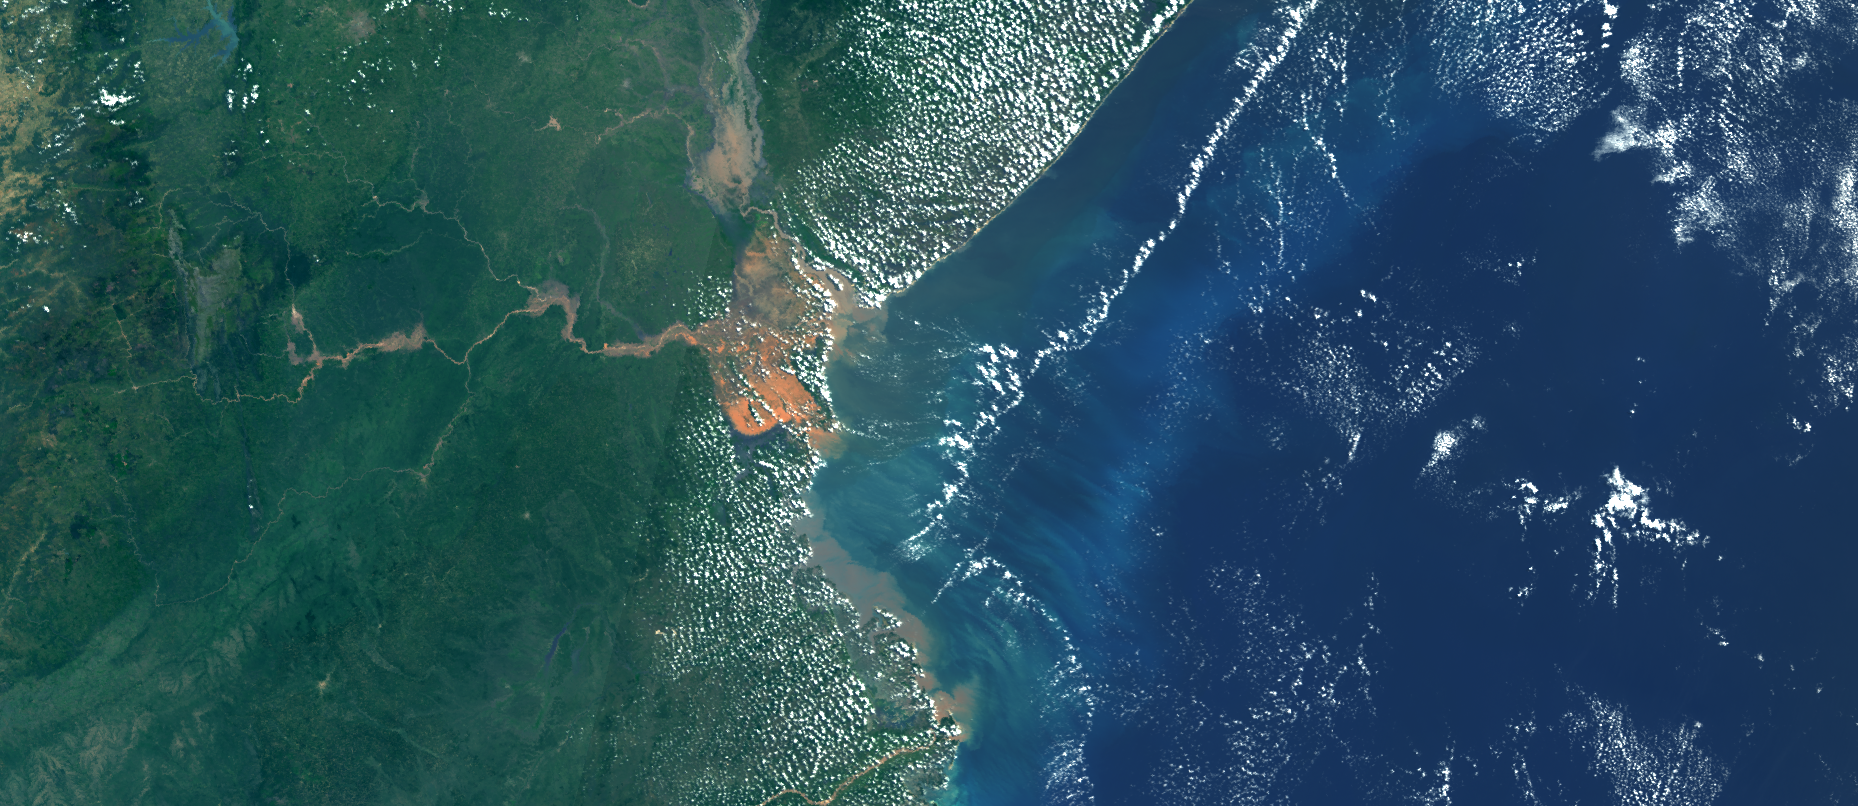 Enhanced true color visualization of Beira, Mozambique. Acquired on 25.3.2019.